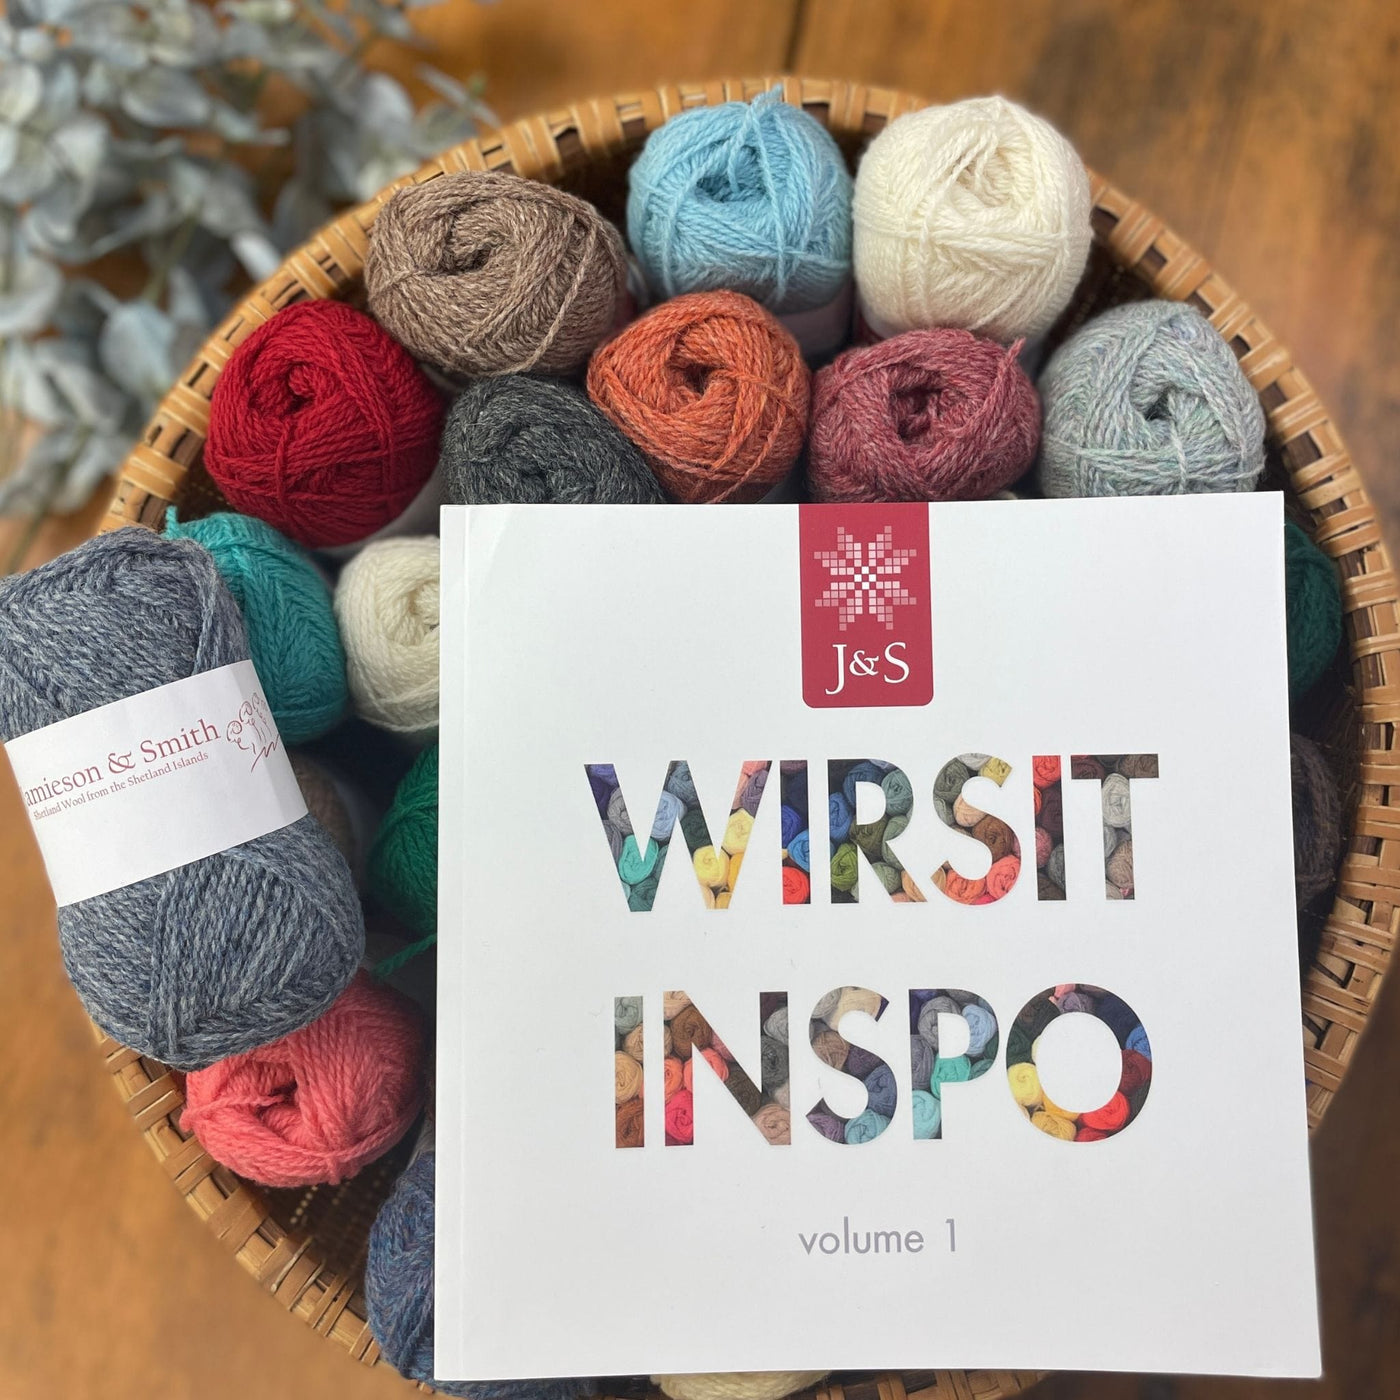 Wirsit Inspo Volume 1 from Jamieson & Smith. Cover of book is shown on top of a basket of Jamieson & Smith 2ply Jumper Weight yarn. 